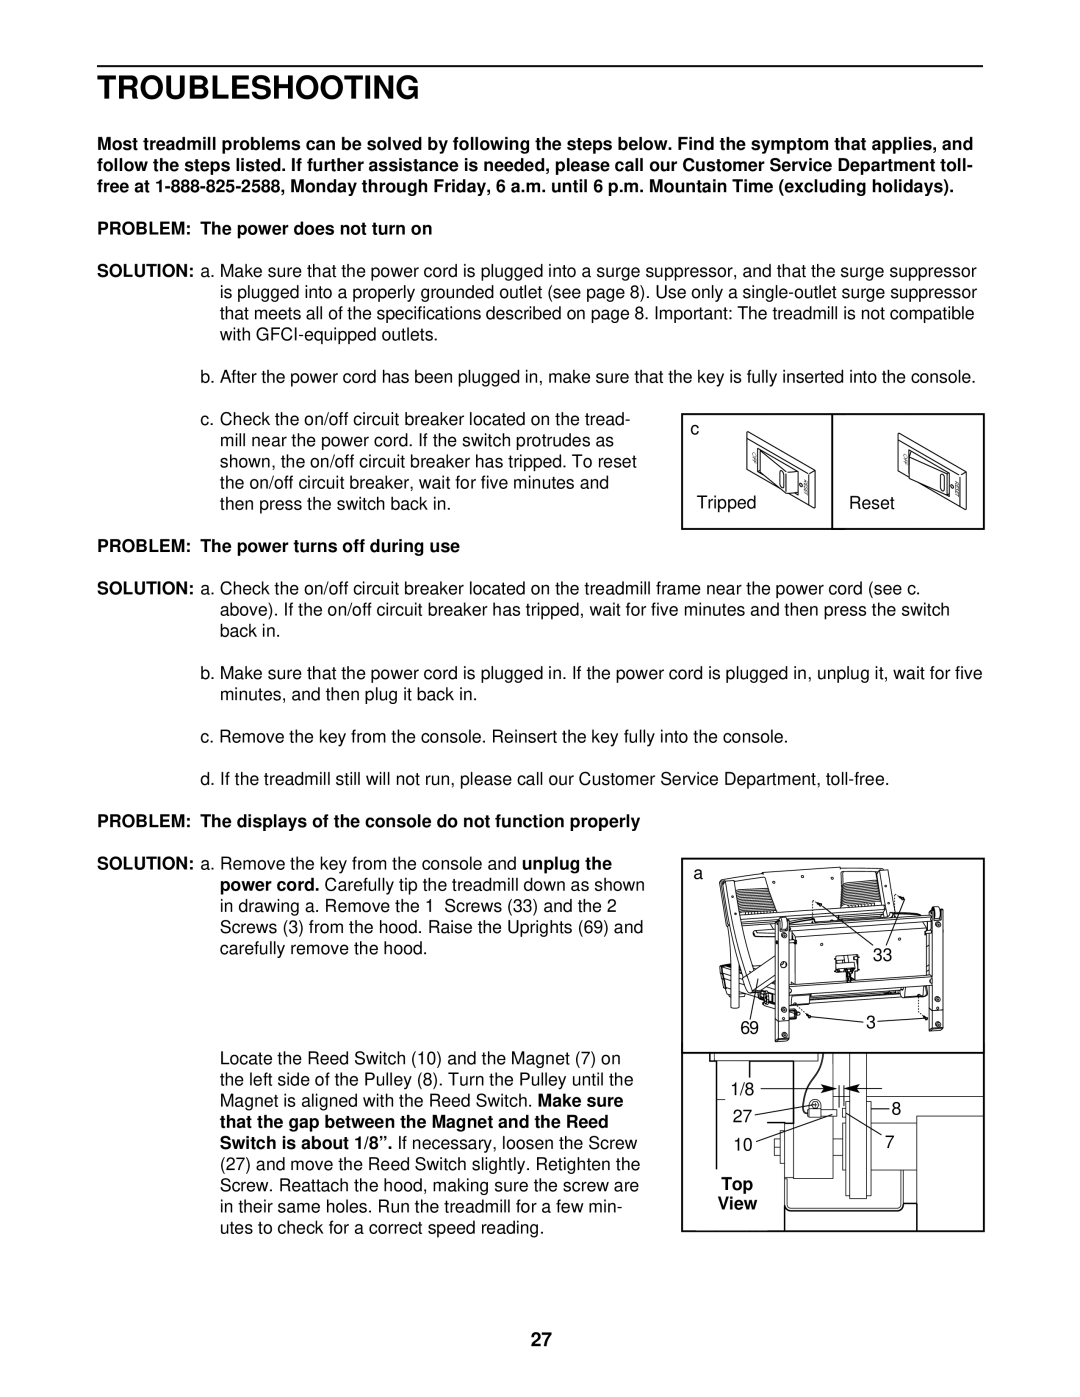 NordicTrack NTL14940 user manual Troubleshooting, Problem The power turns off during use, Top View 